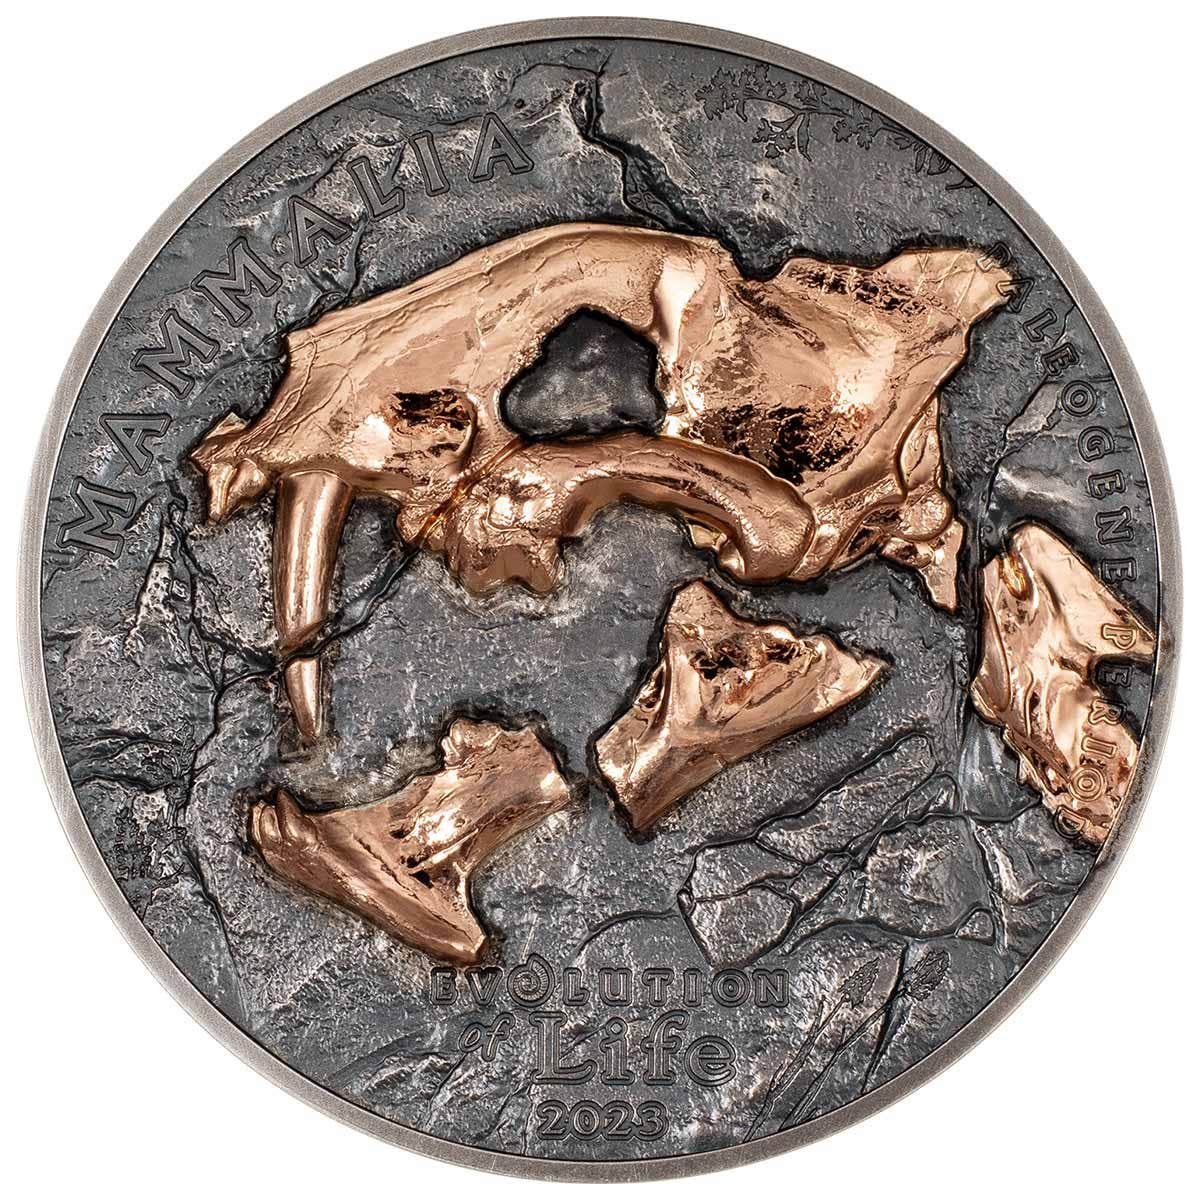 Evolution of Life 2023 500T Nimravidae Gold-plated 1oz Silver Coin